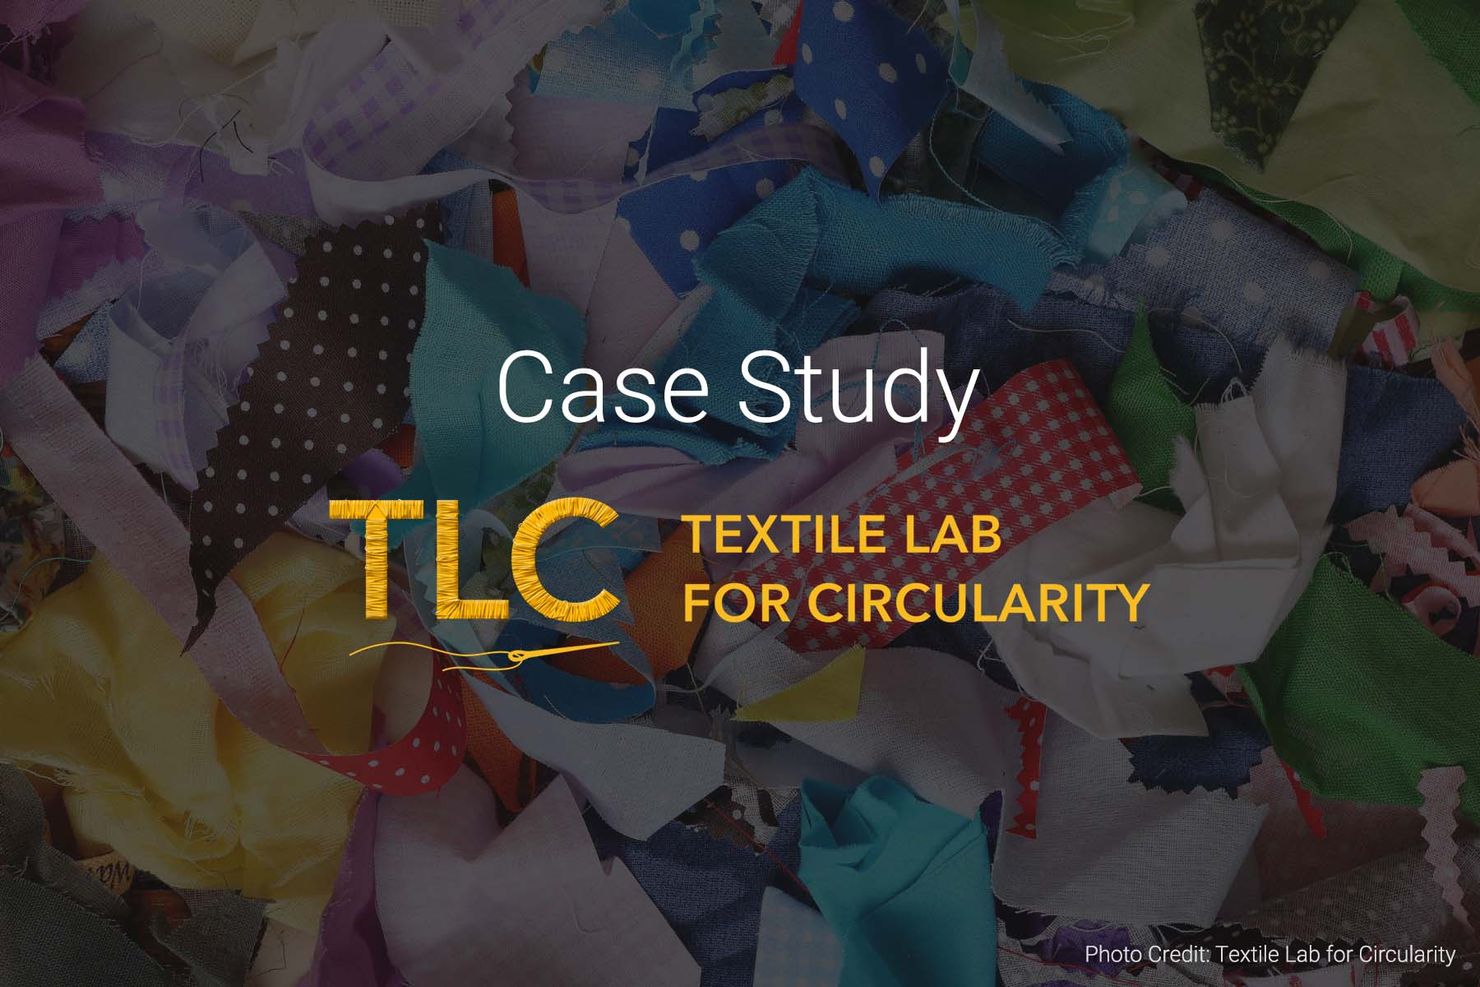 'case study' and textile lab for circularity logo over pile of multicolored fabric scraps